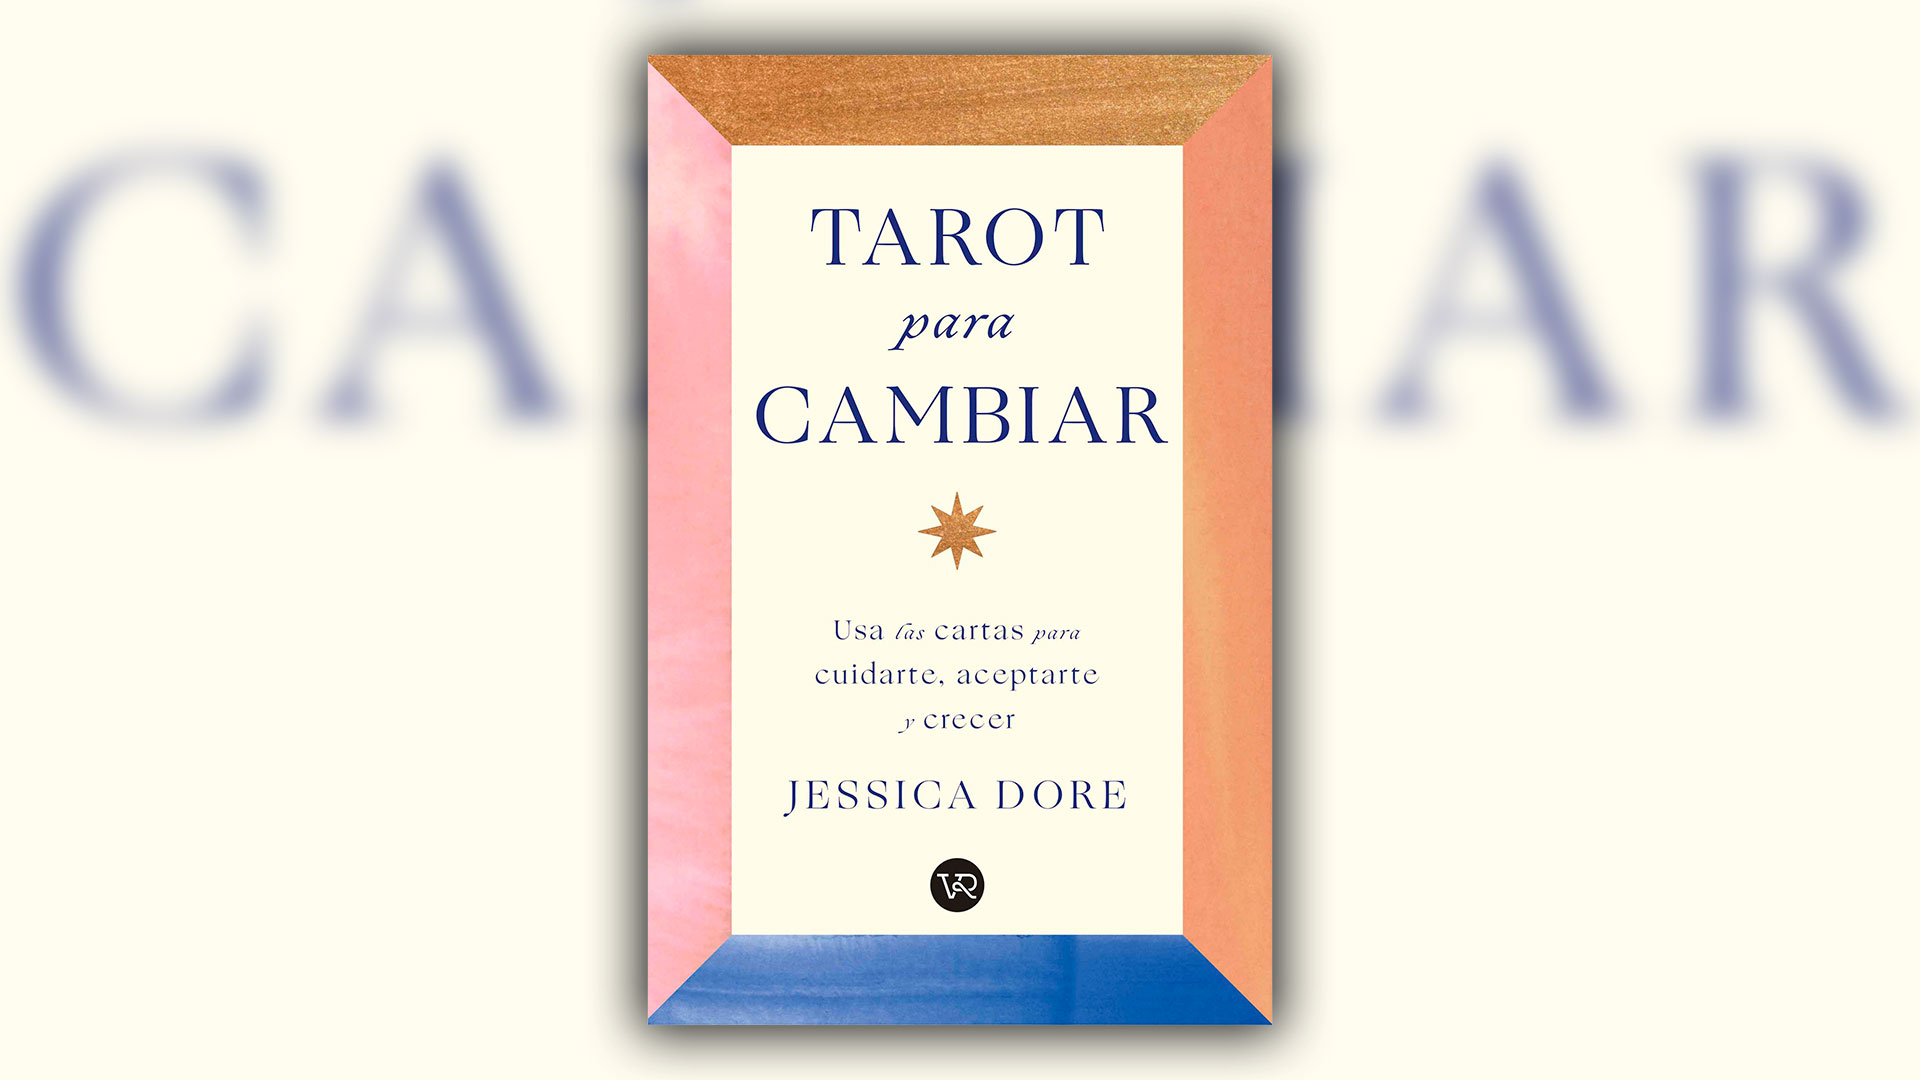 cover of "Tarot to change"by Jessica Dore, edited by V&R.